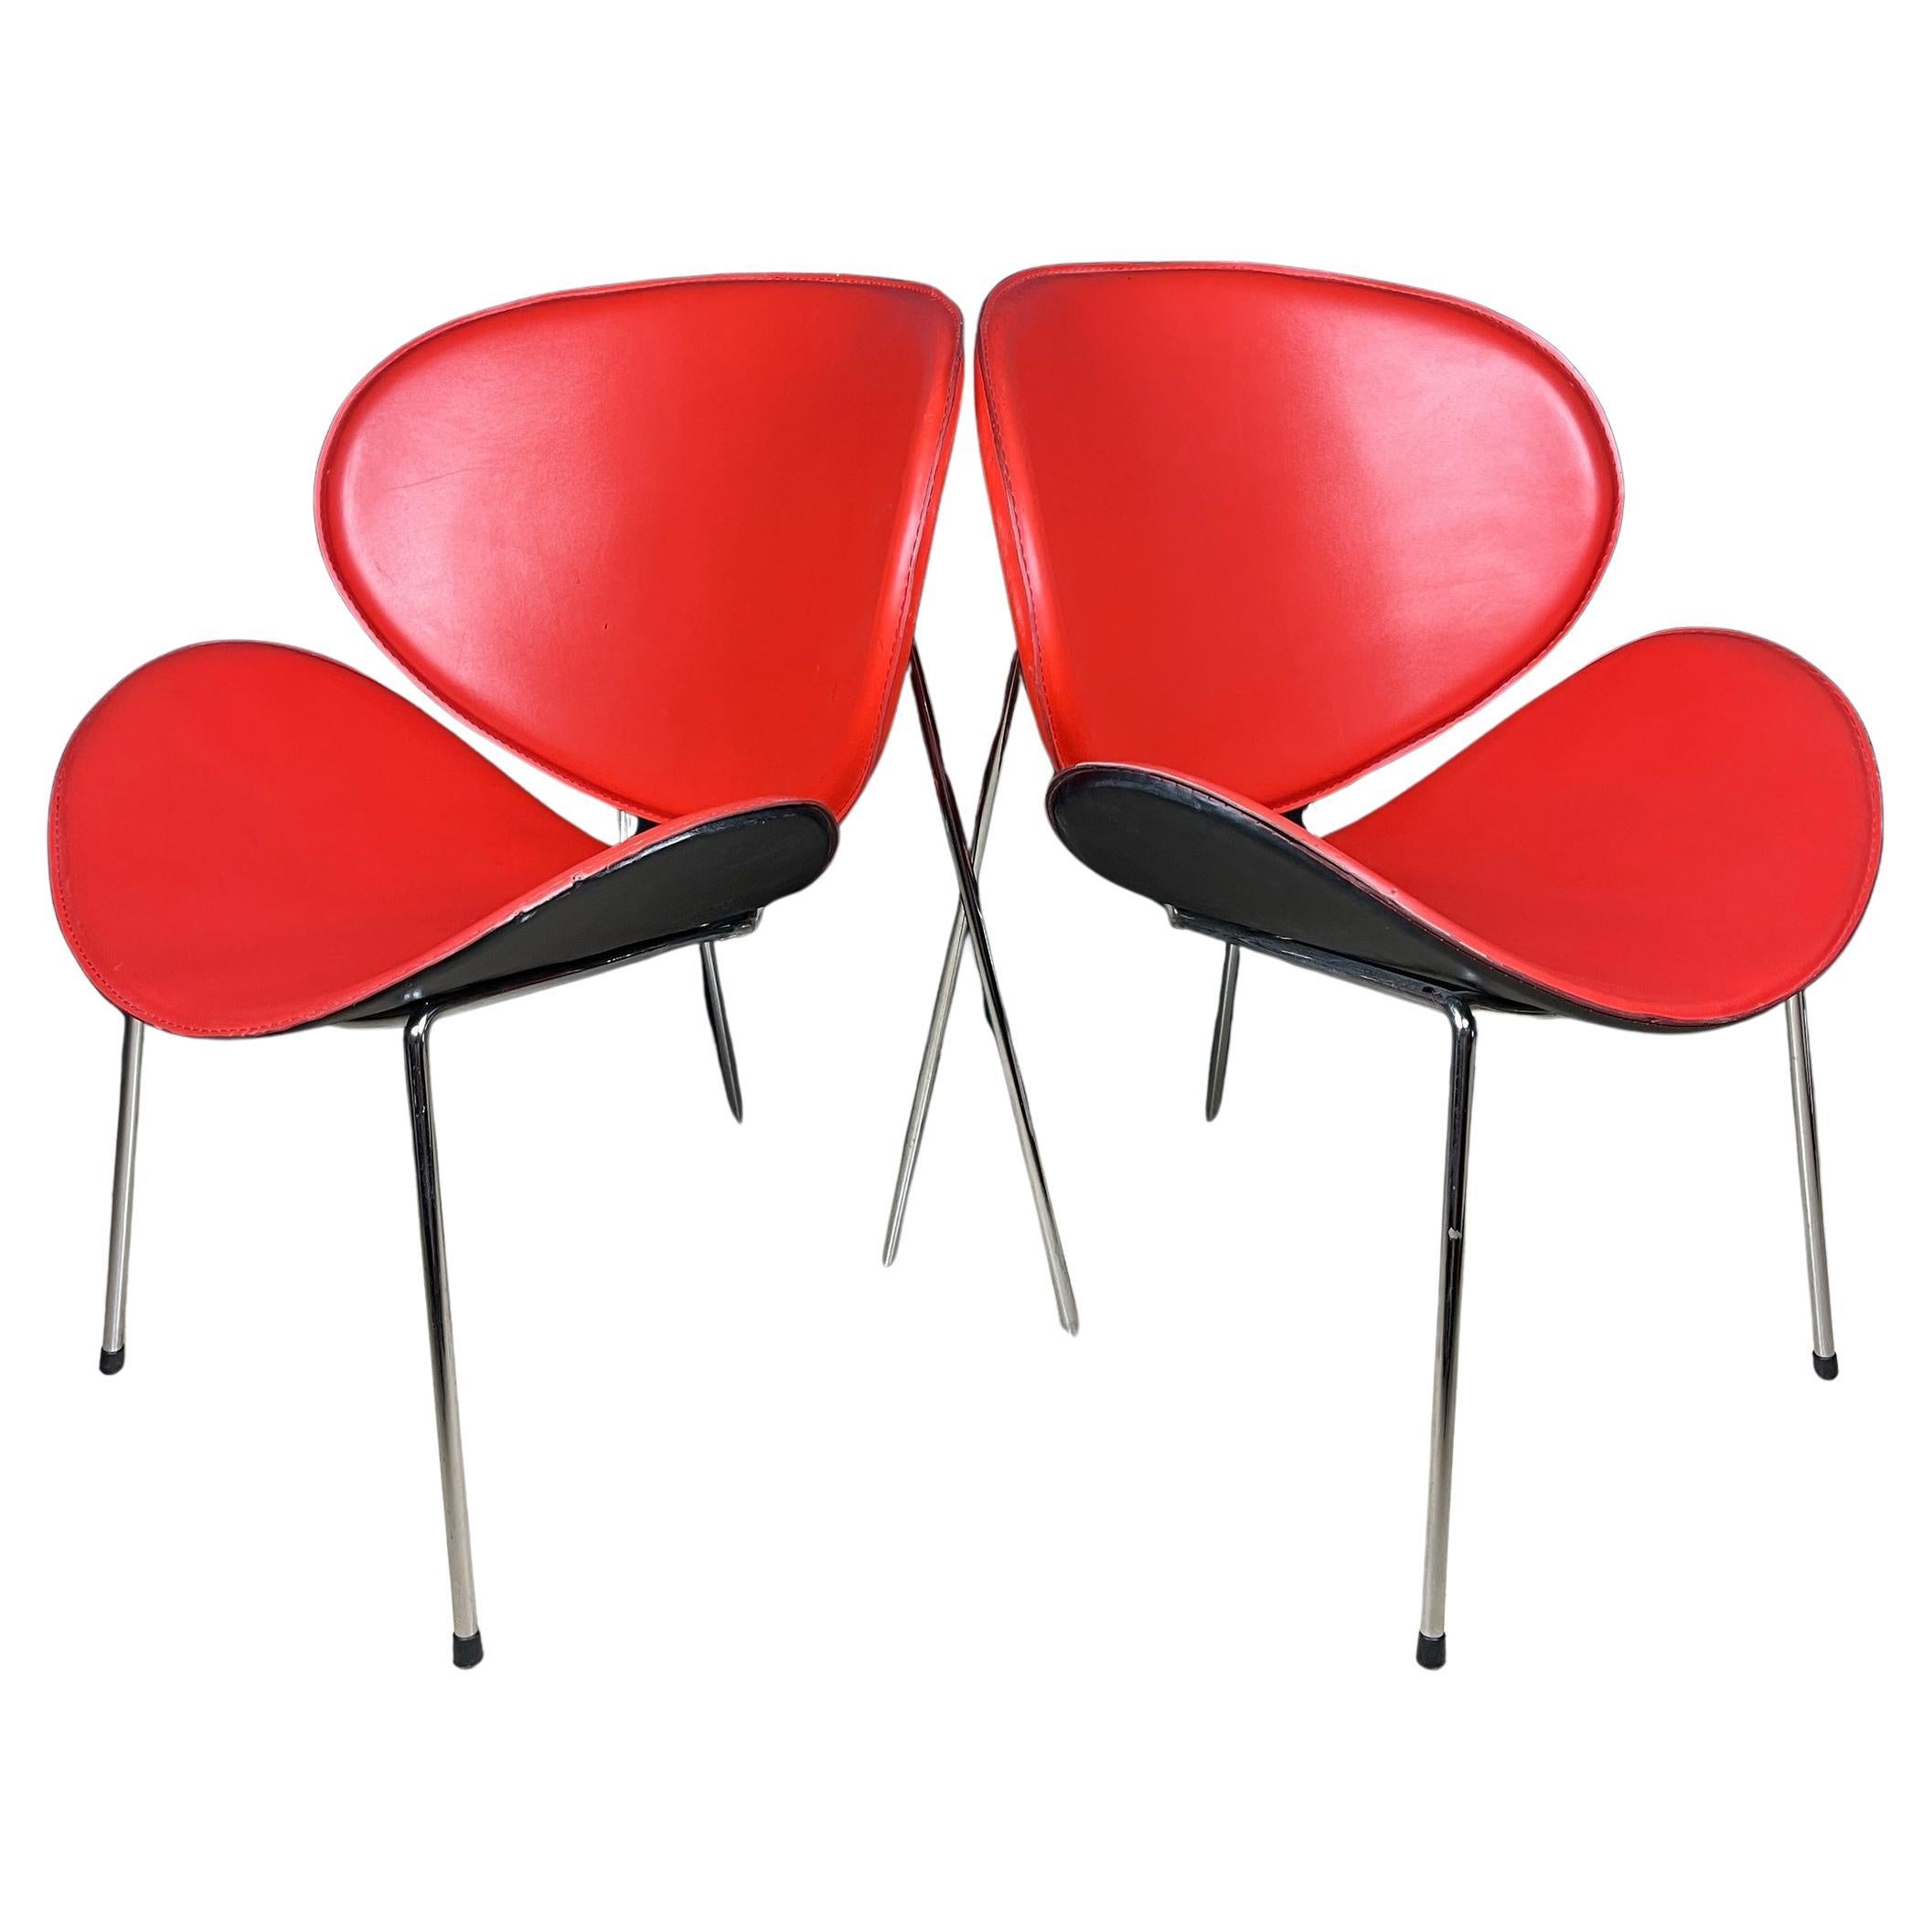 Pair of red lounge chairs Italy 1990s Design Pierre Paulin Style For Sale